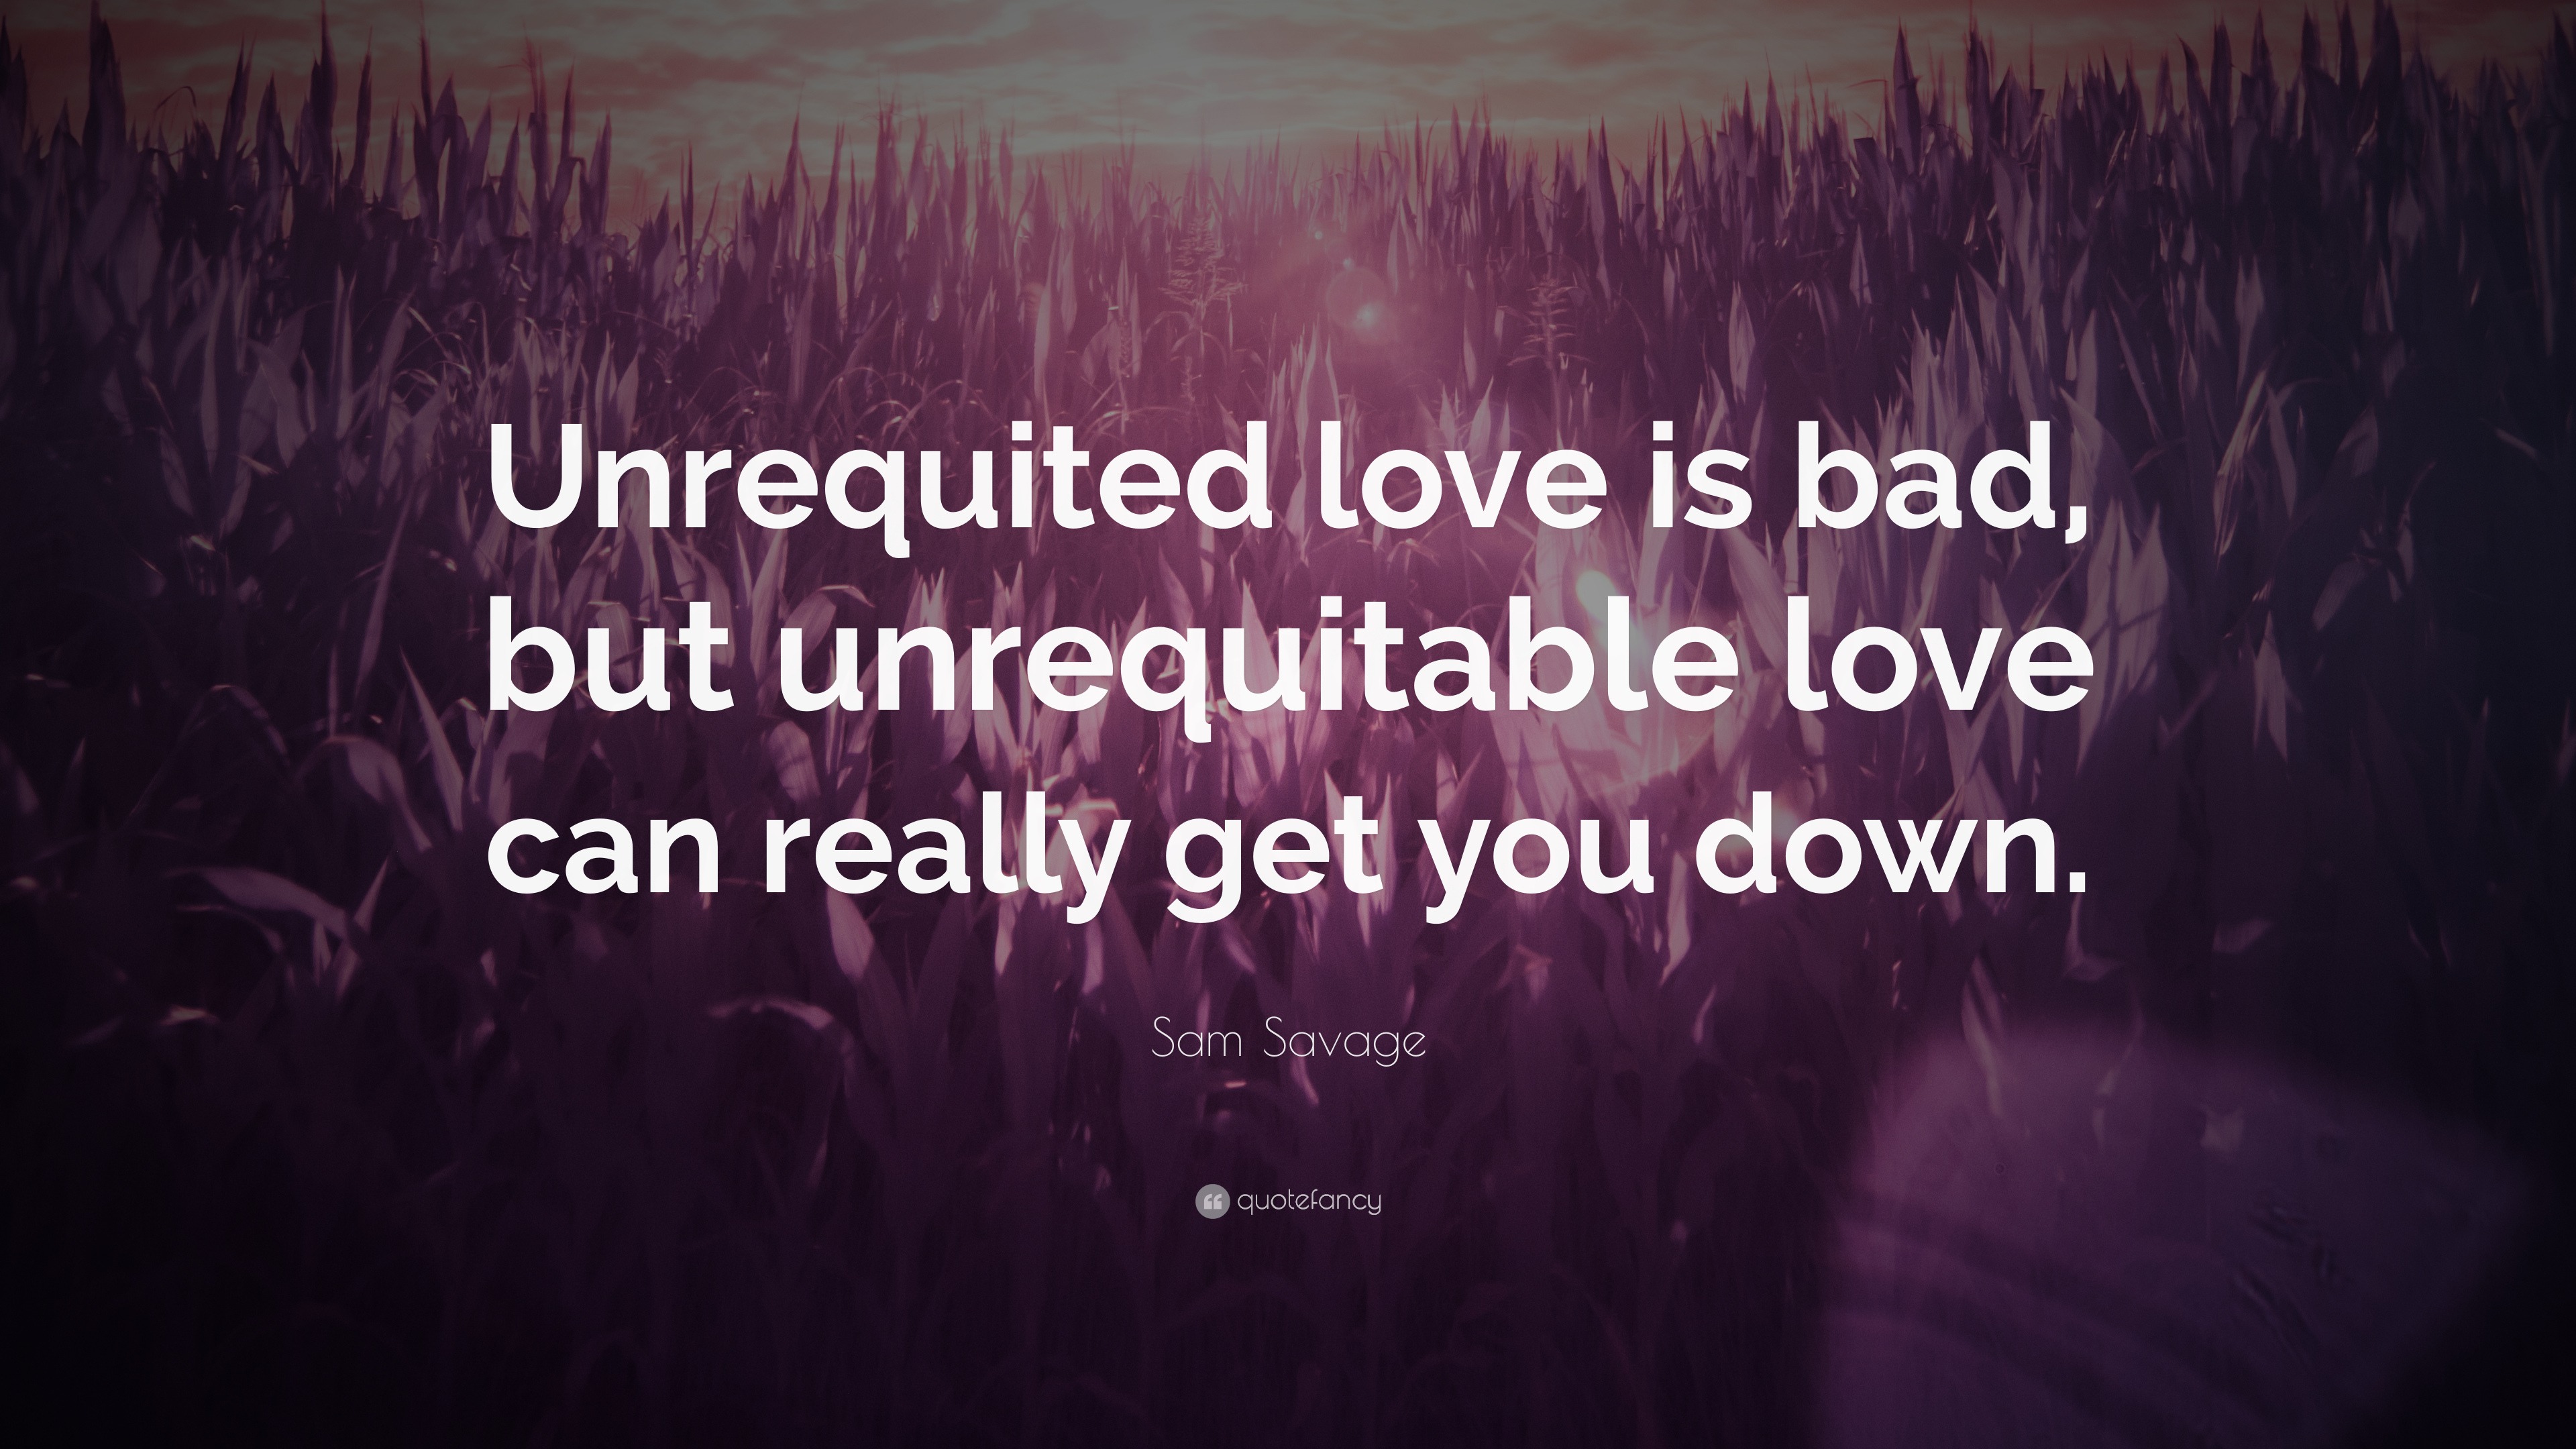 is unrequited love good or bad